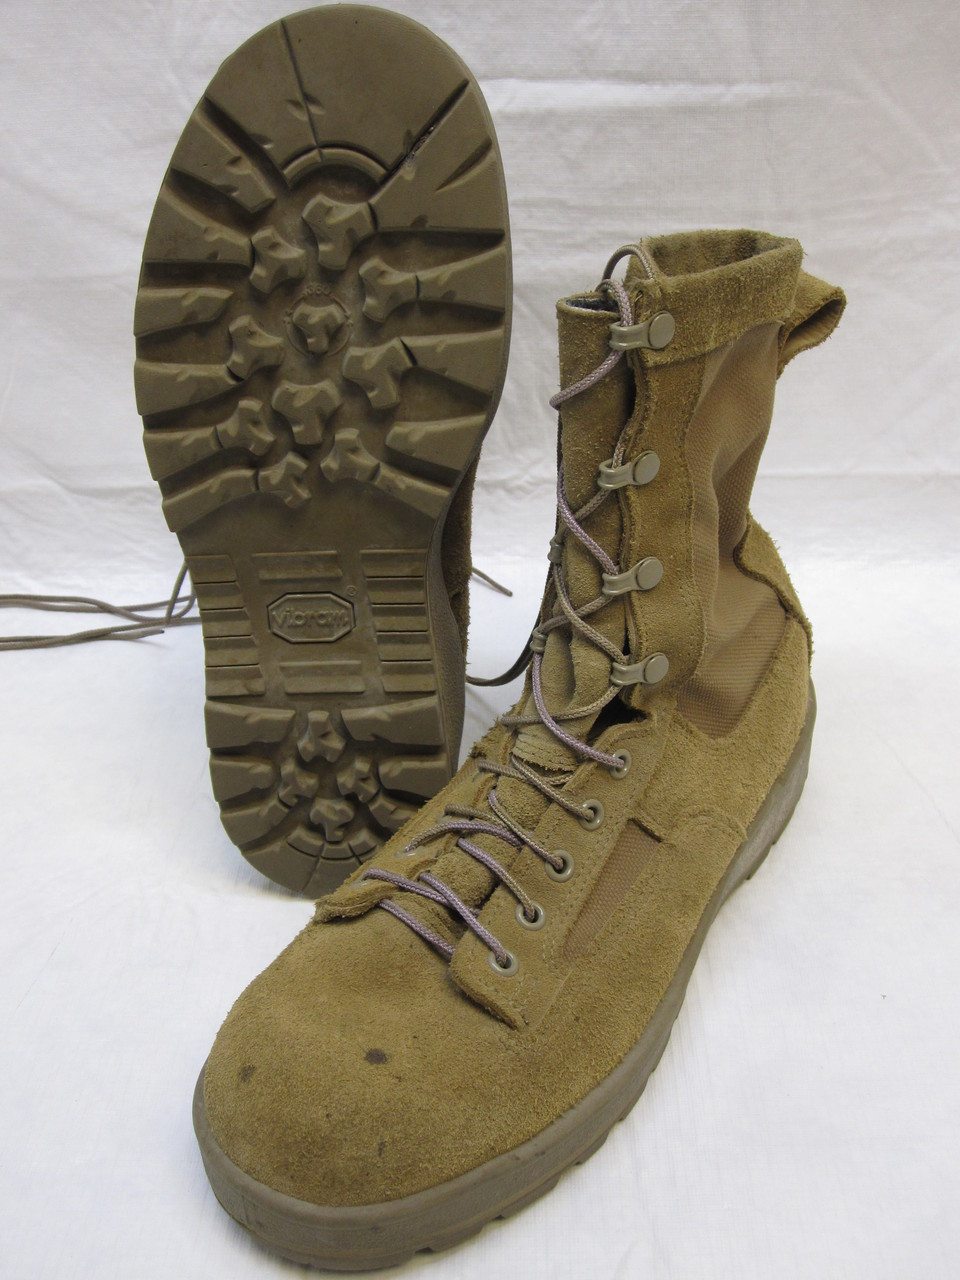 ALTAMA ARMY OCP GORE-TEX COLD WEATHER COMBAT BOOTS 8.5 W ATERPROOF